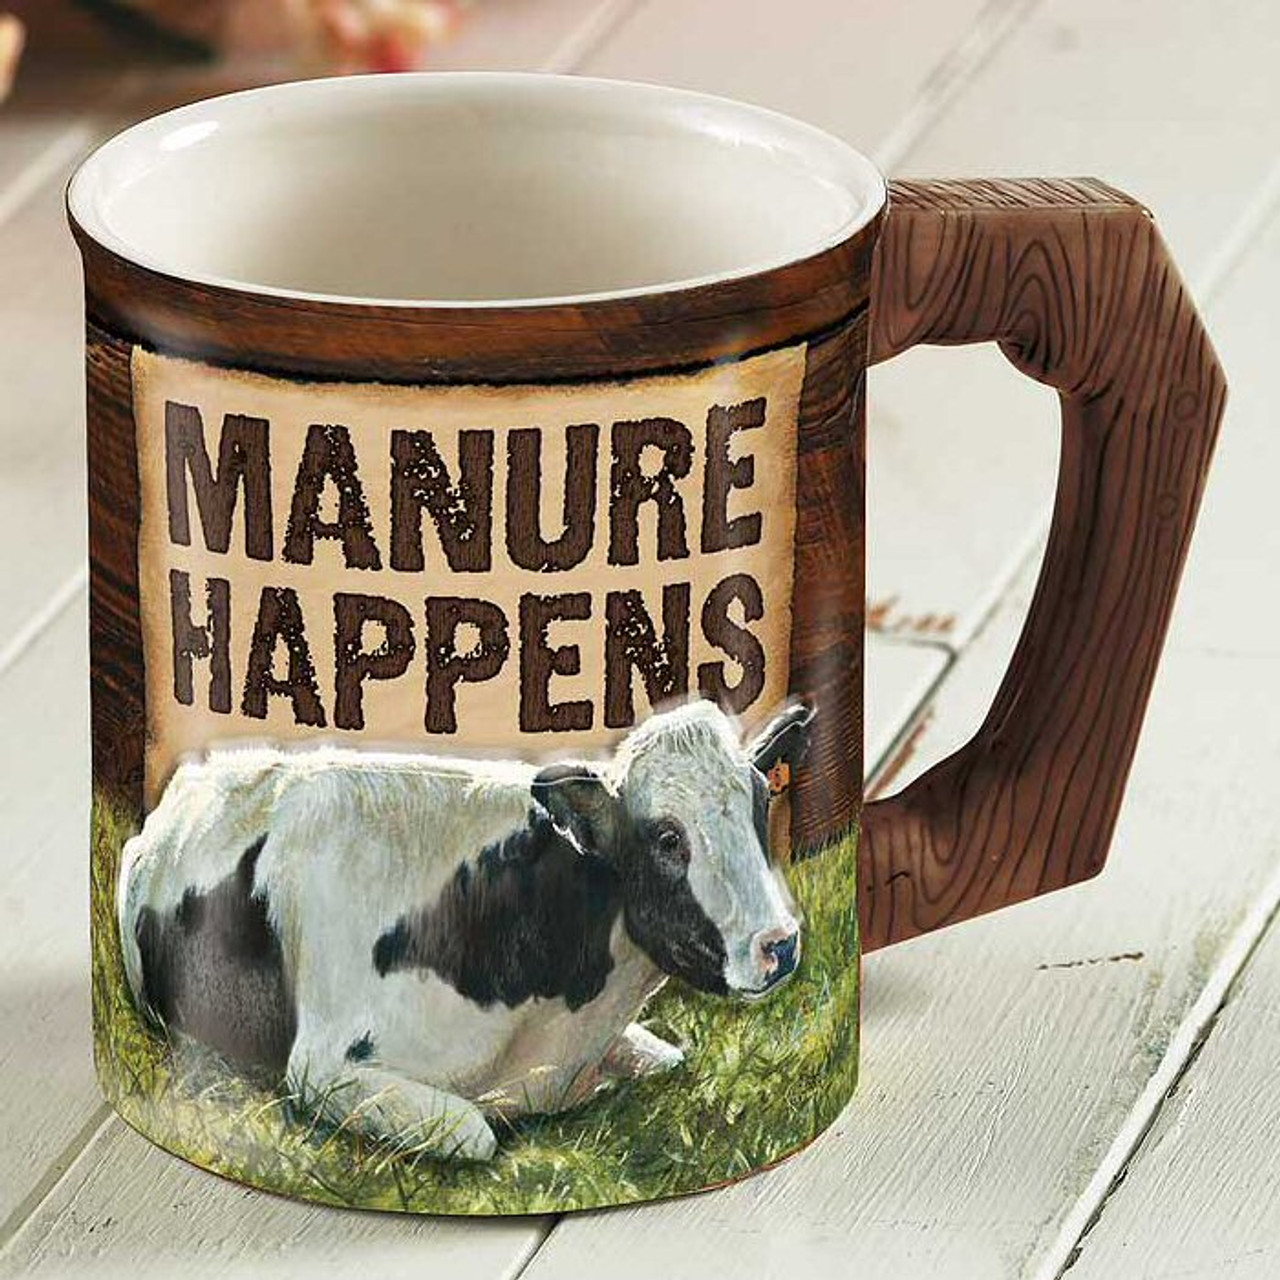 https://cdn11.bigcommerce.com/s-oo0gdojvjo/images/stencil/1280x1280/products/27274/37124/manure-happens-cow-sculpted-stoneware-coffee-mugs-set-of-6-wild-wings__28776.1537877525.jpg?c=2